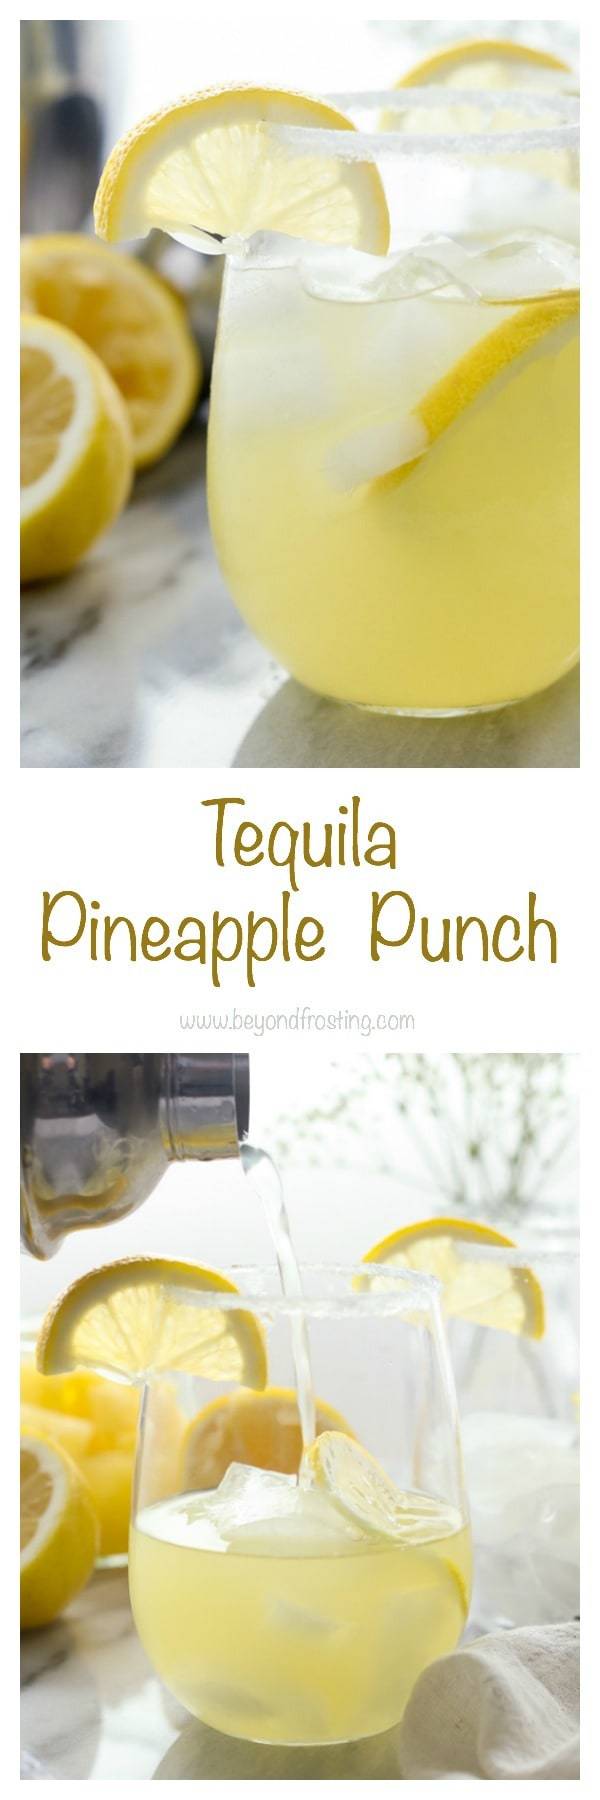 Tequila Pineapple Punch Cocktail Beyond Frosting,All Free Crochet Granny Square Patterns